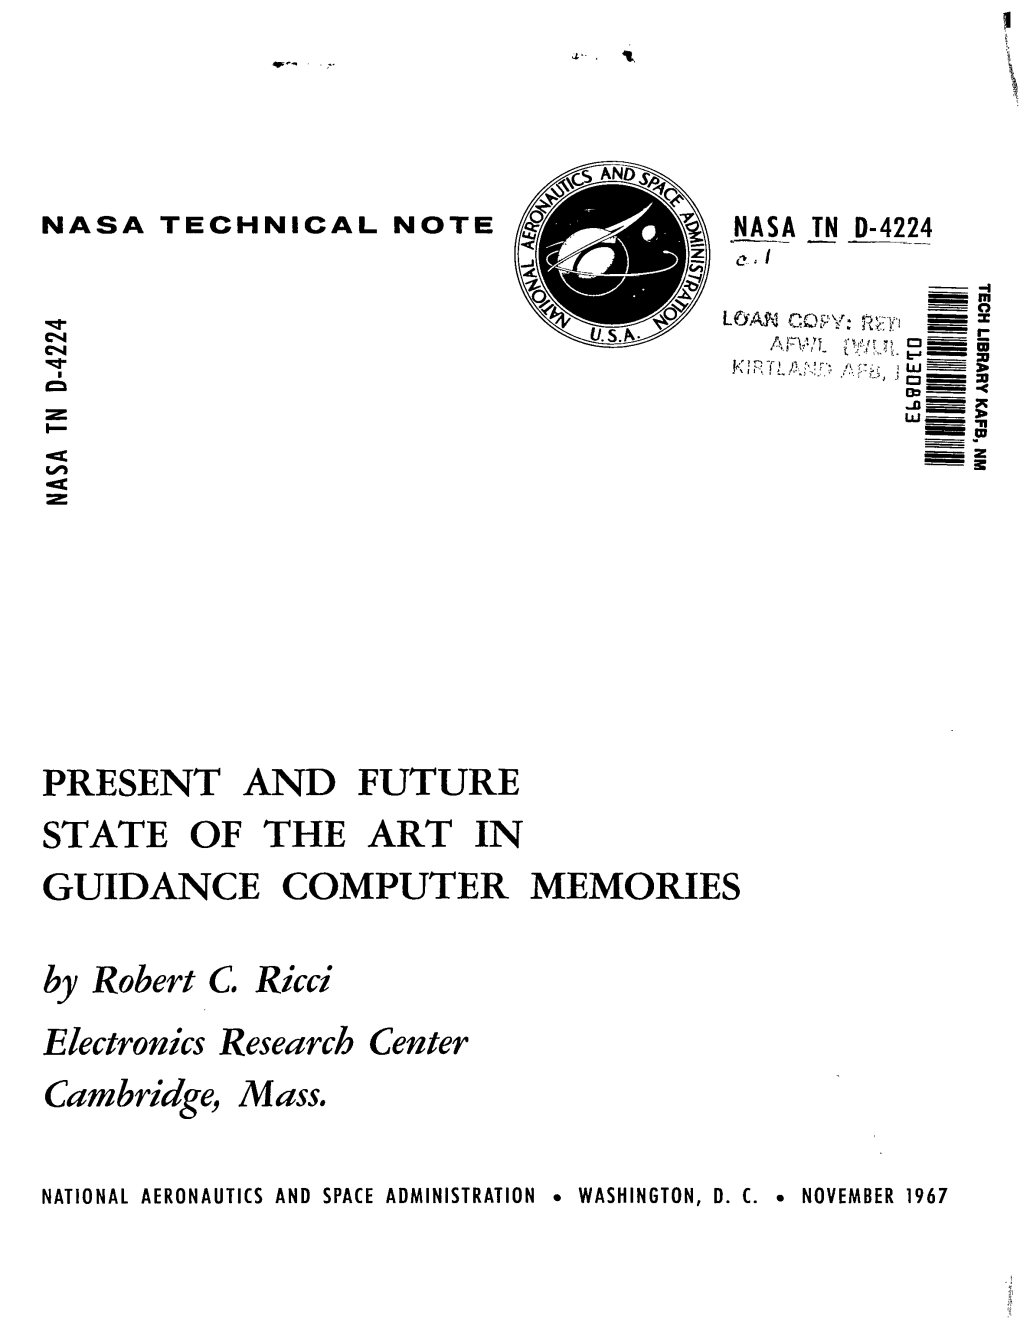 Present and Future State of the Art in Guidance Computer Memories